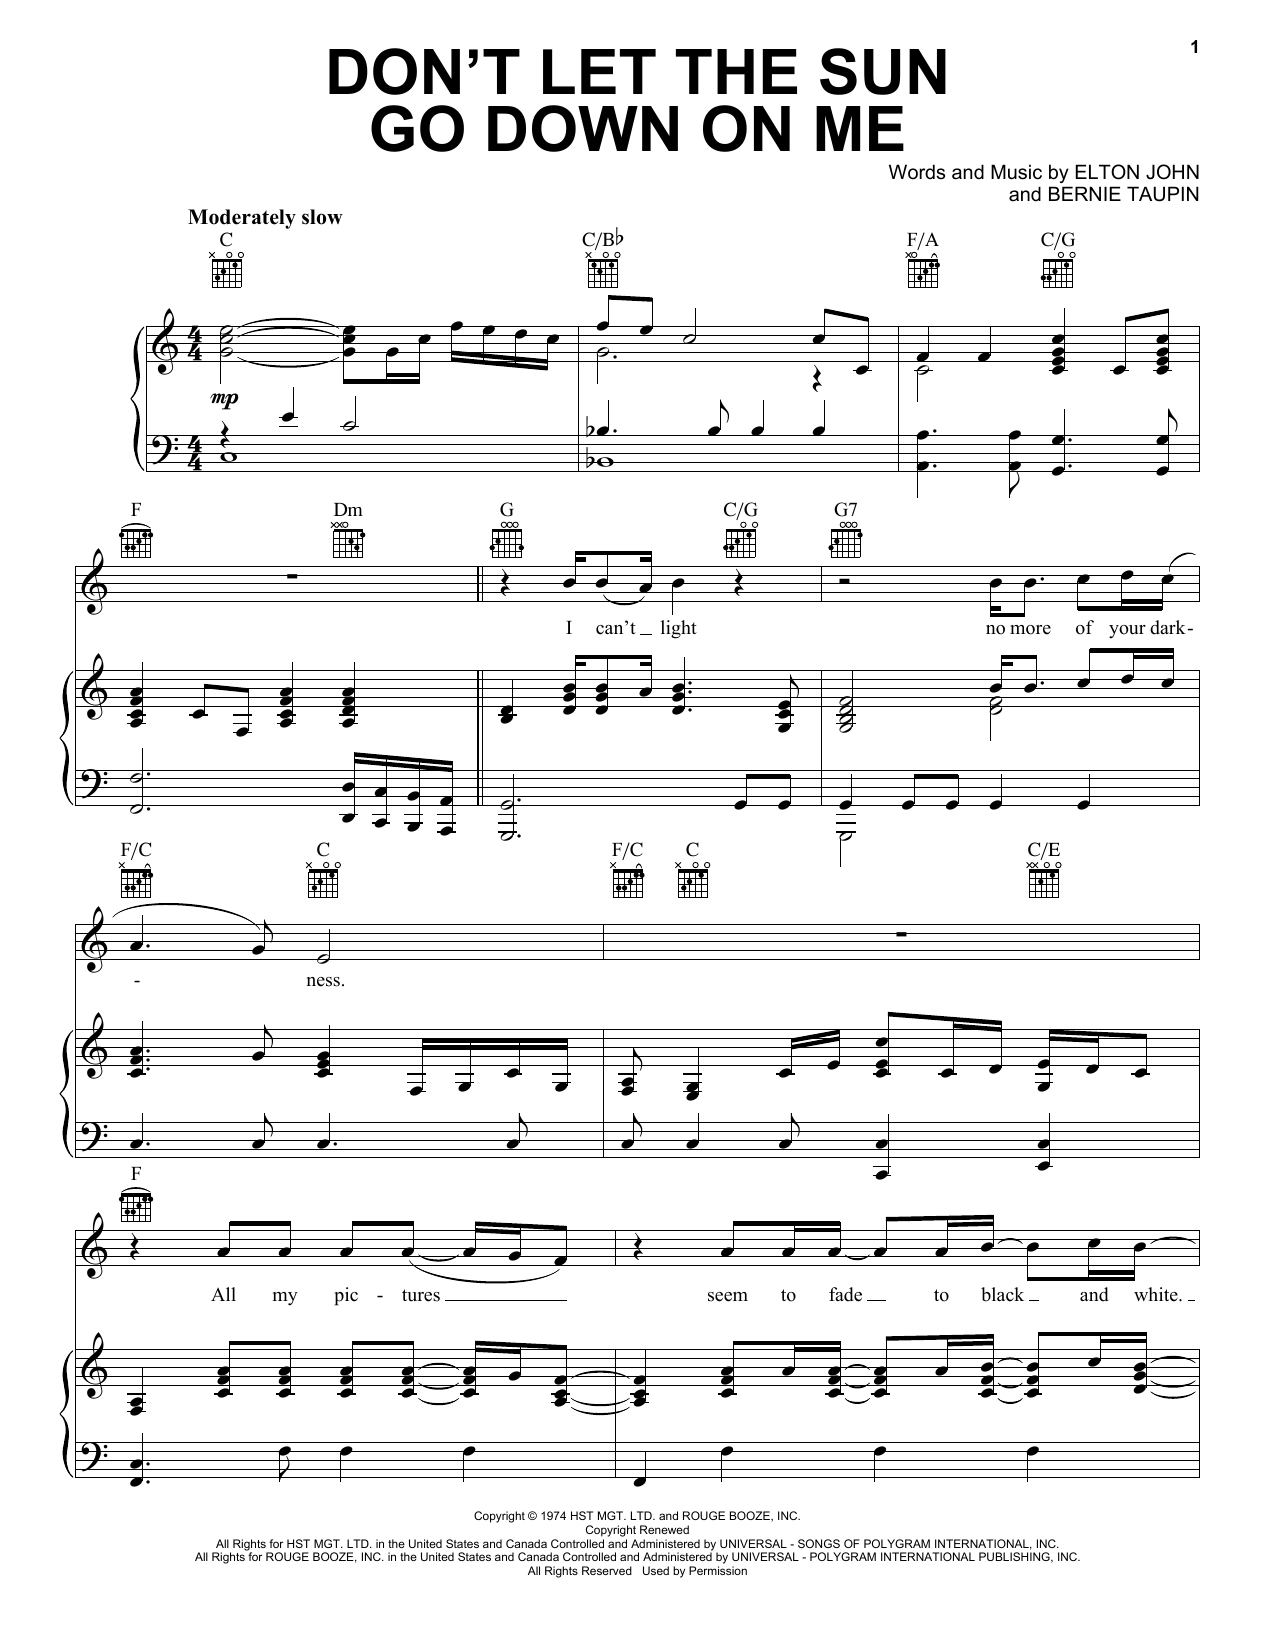 Elton John Don't Let The Sun Go Down On Me sheet music notes and chords. Download Printable PDF.